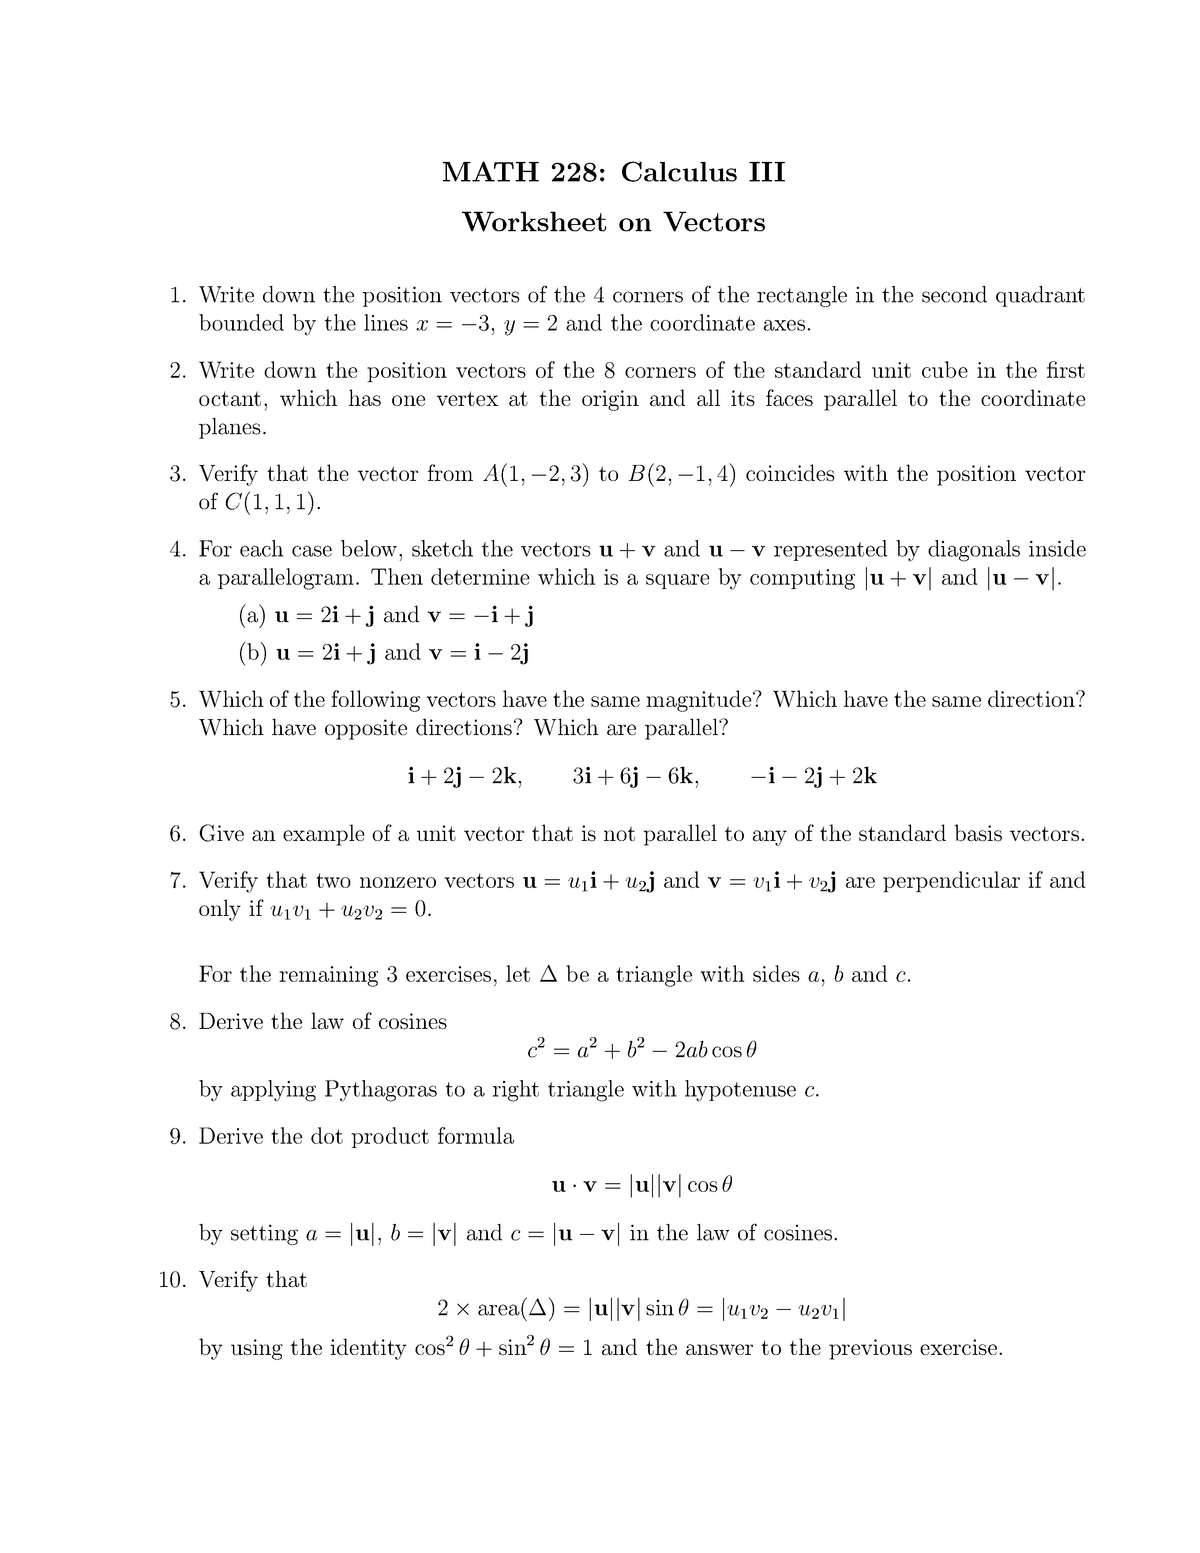 view-how-s-business-math-worksheet-c-69-pictures-the-math